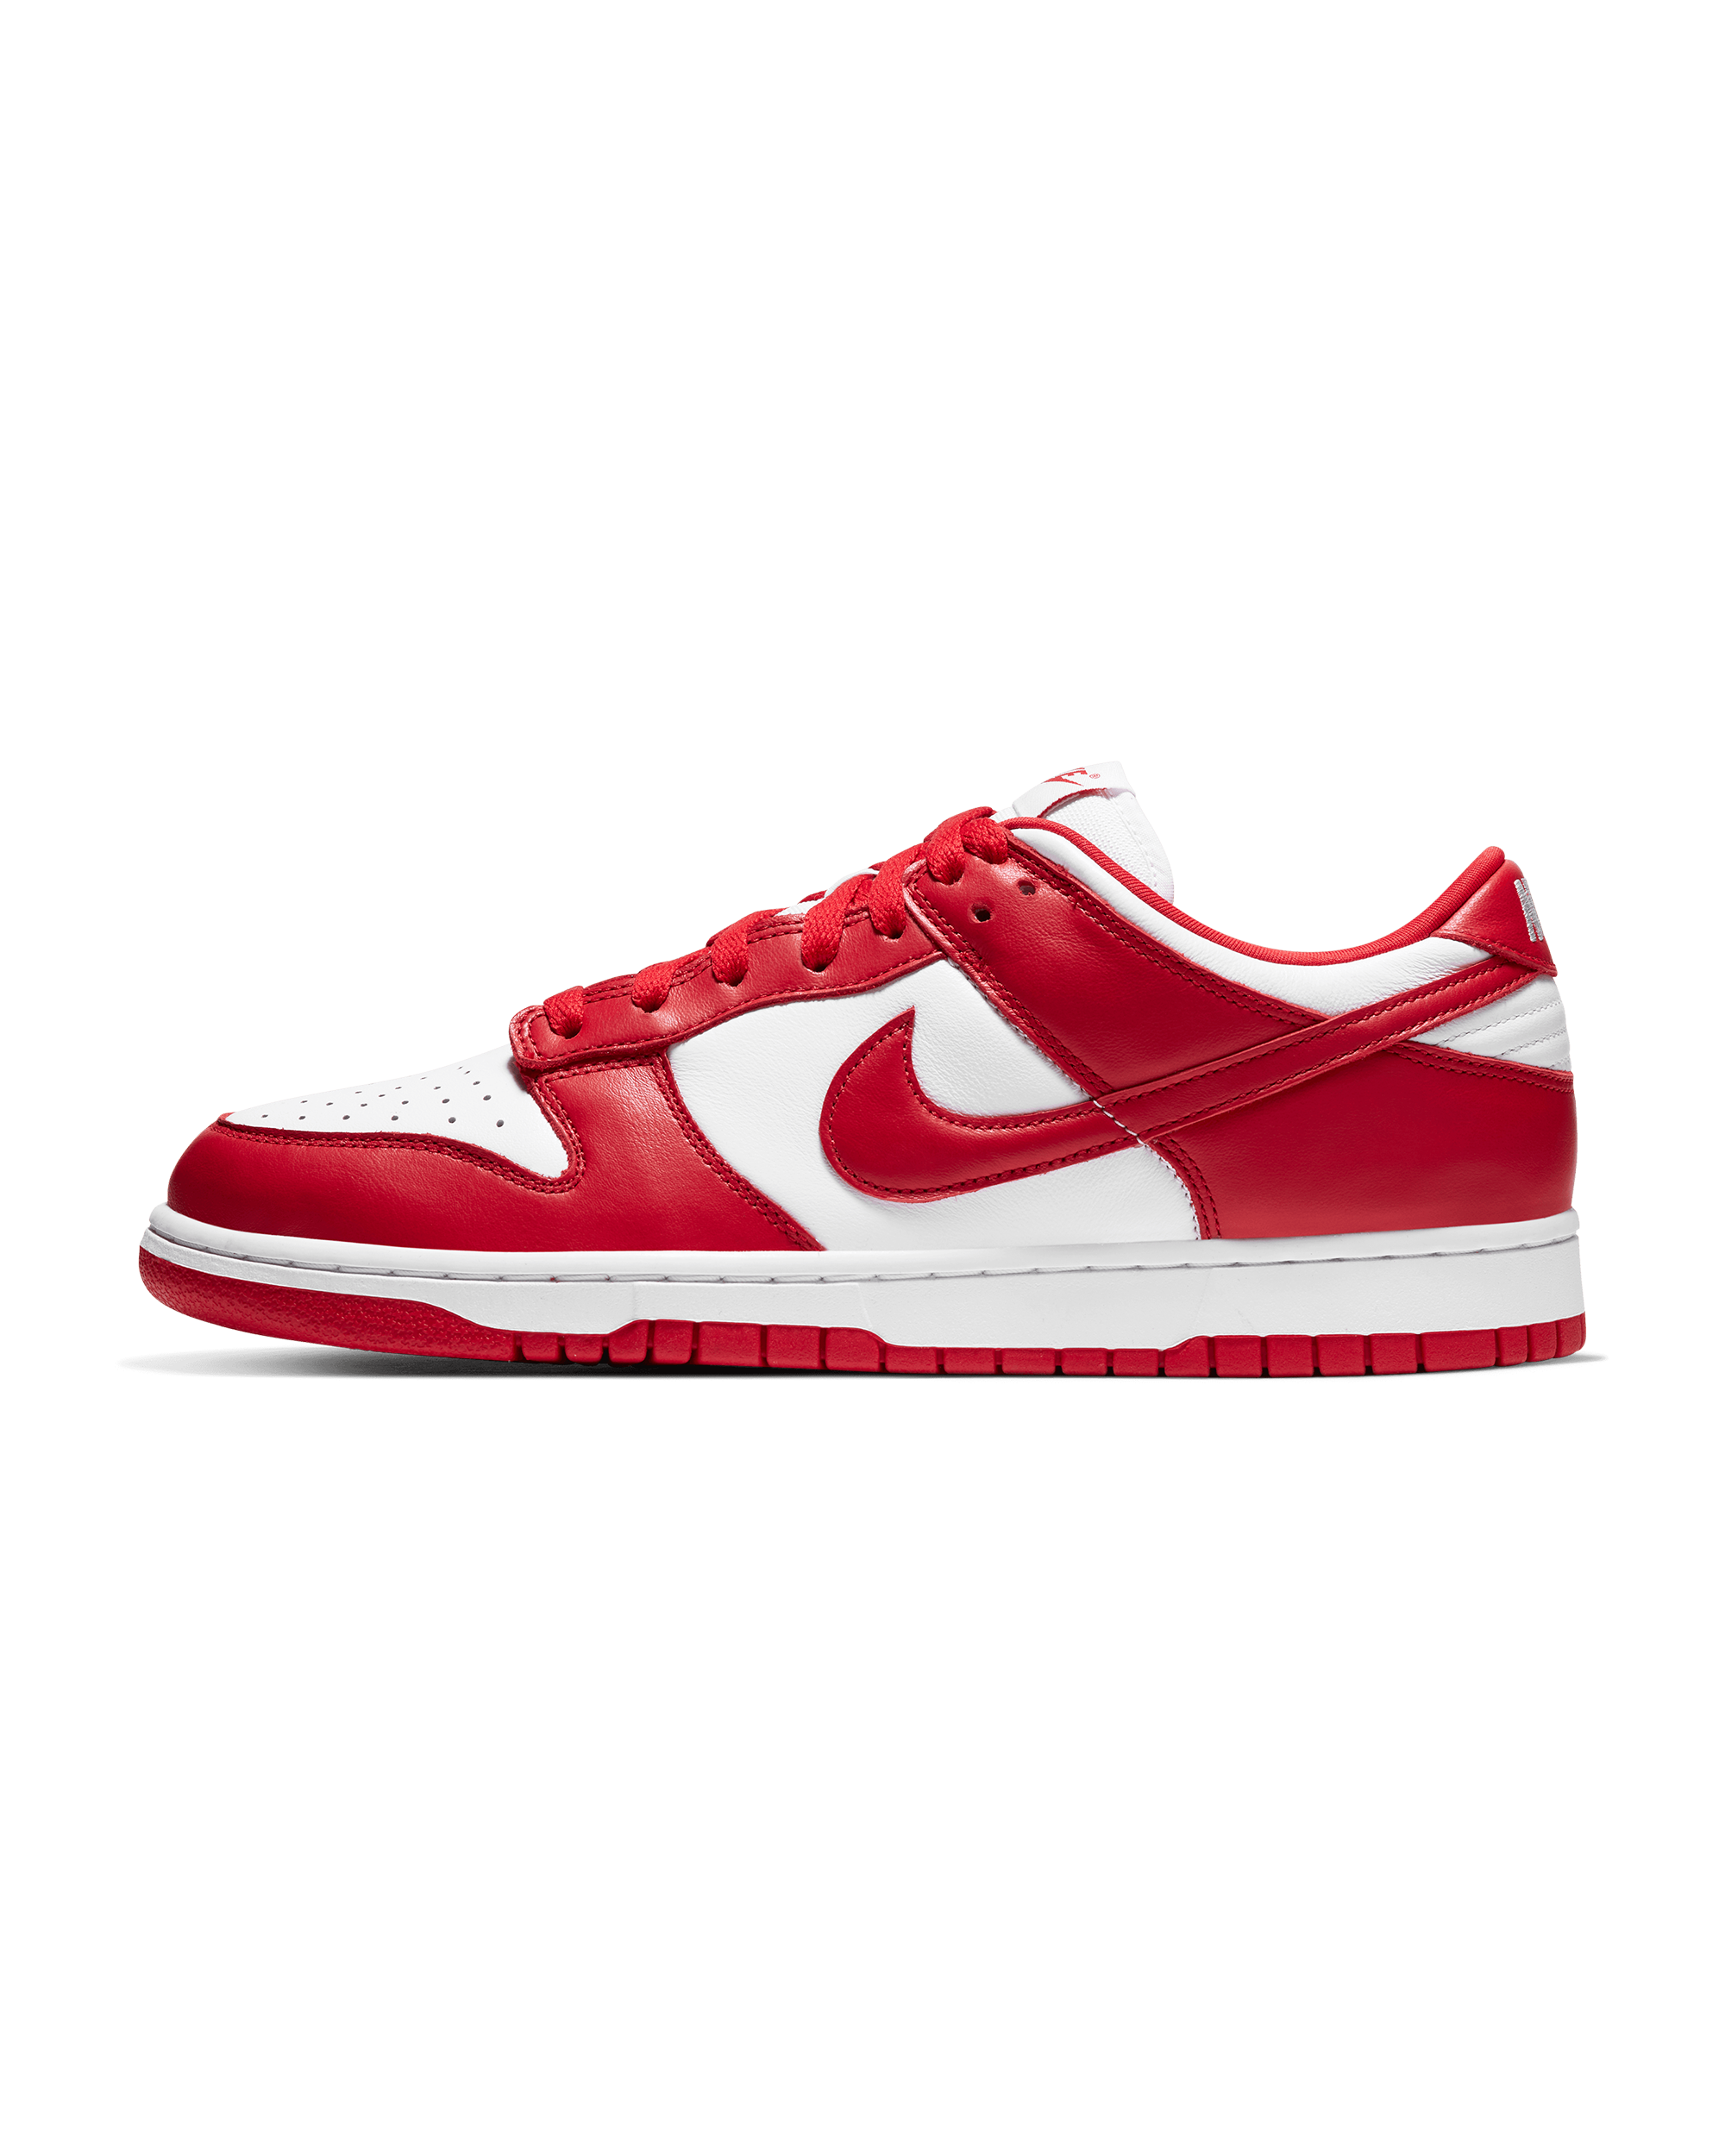 Dunk Low SP “University Red” - WHITE / UNIVERSITY RED